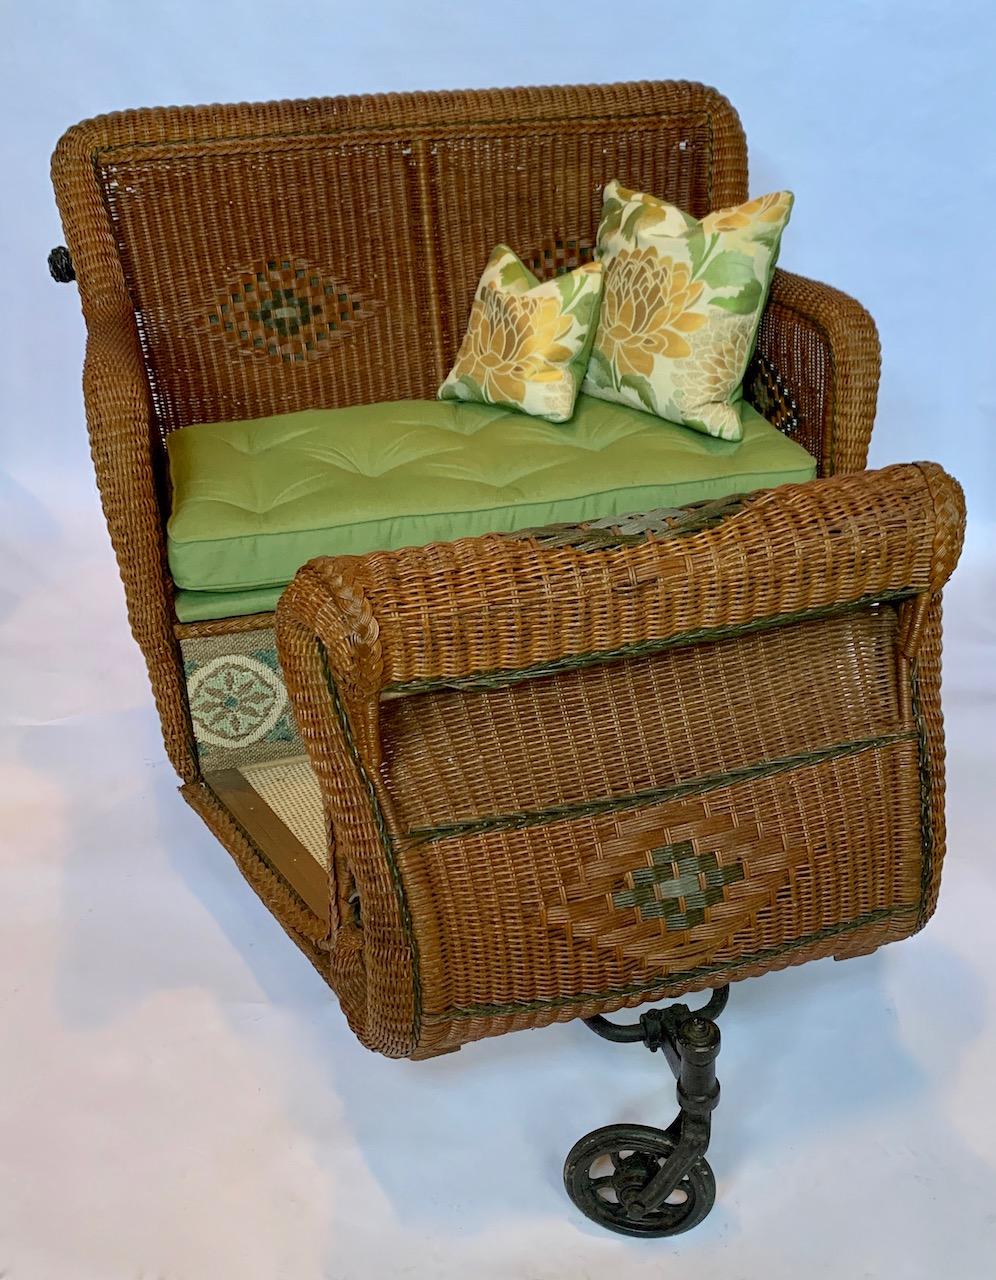 An early 20th century Estate Cart commonly known as a Rolling Chair. This is a rare and unique American piece handwoven and designed by the famous Heywood Wakefield Company of Gardener Ma. built to accommodate two people. It has a beautiful natural